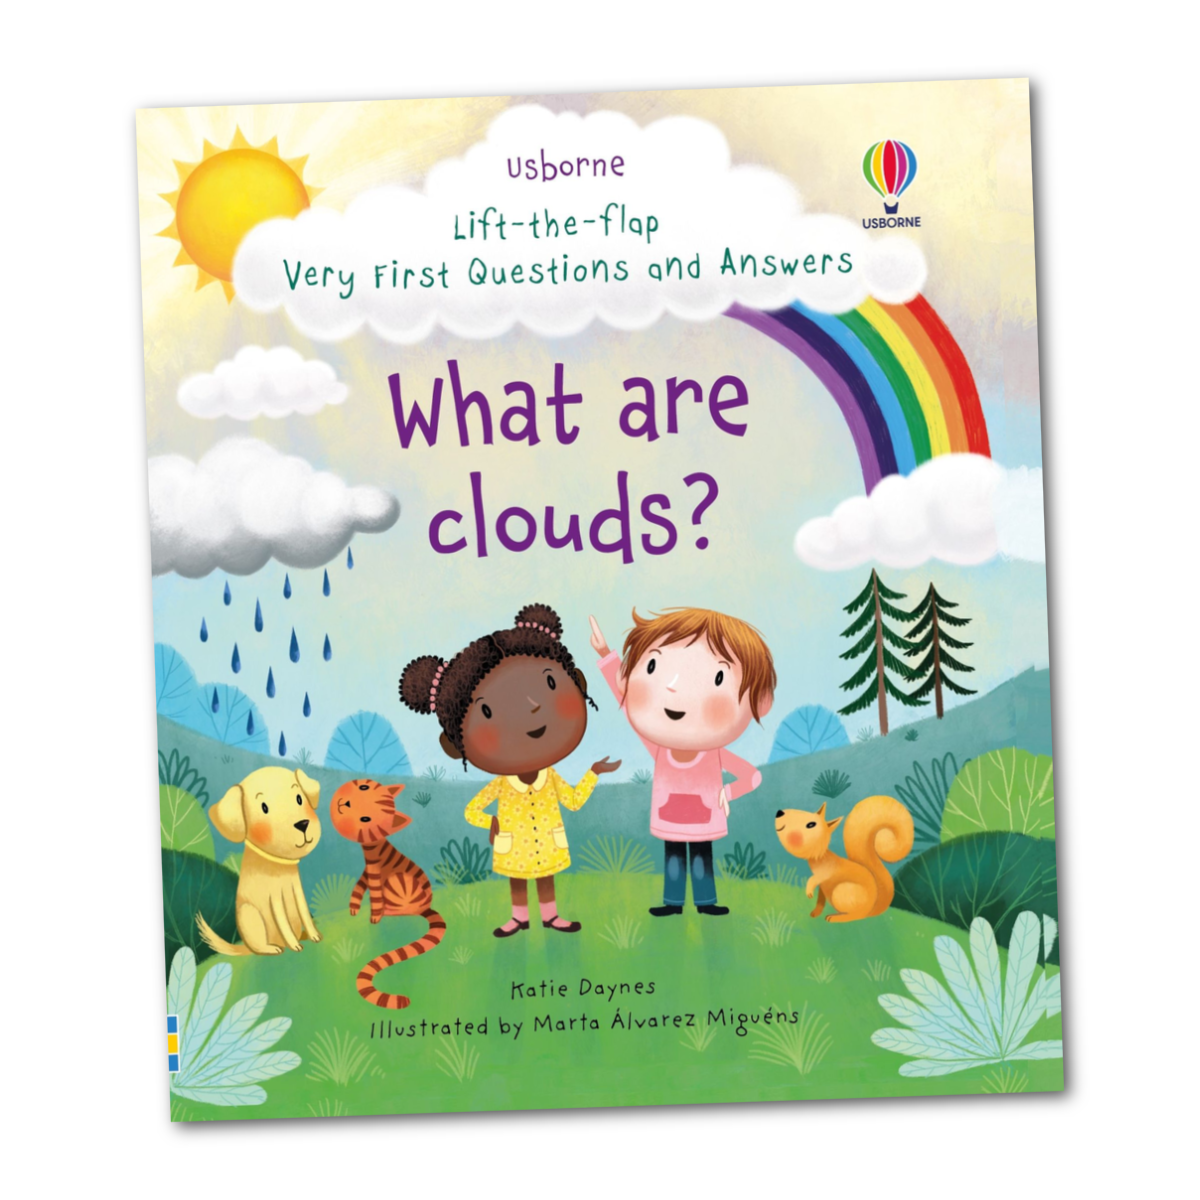 Usborne Books | What are clouds? Lift-the-flap Very First Questions and Answers